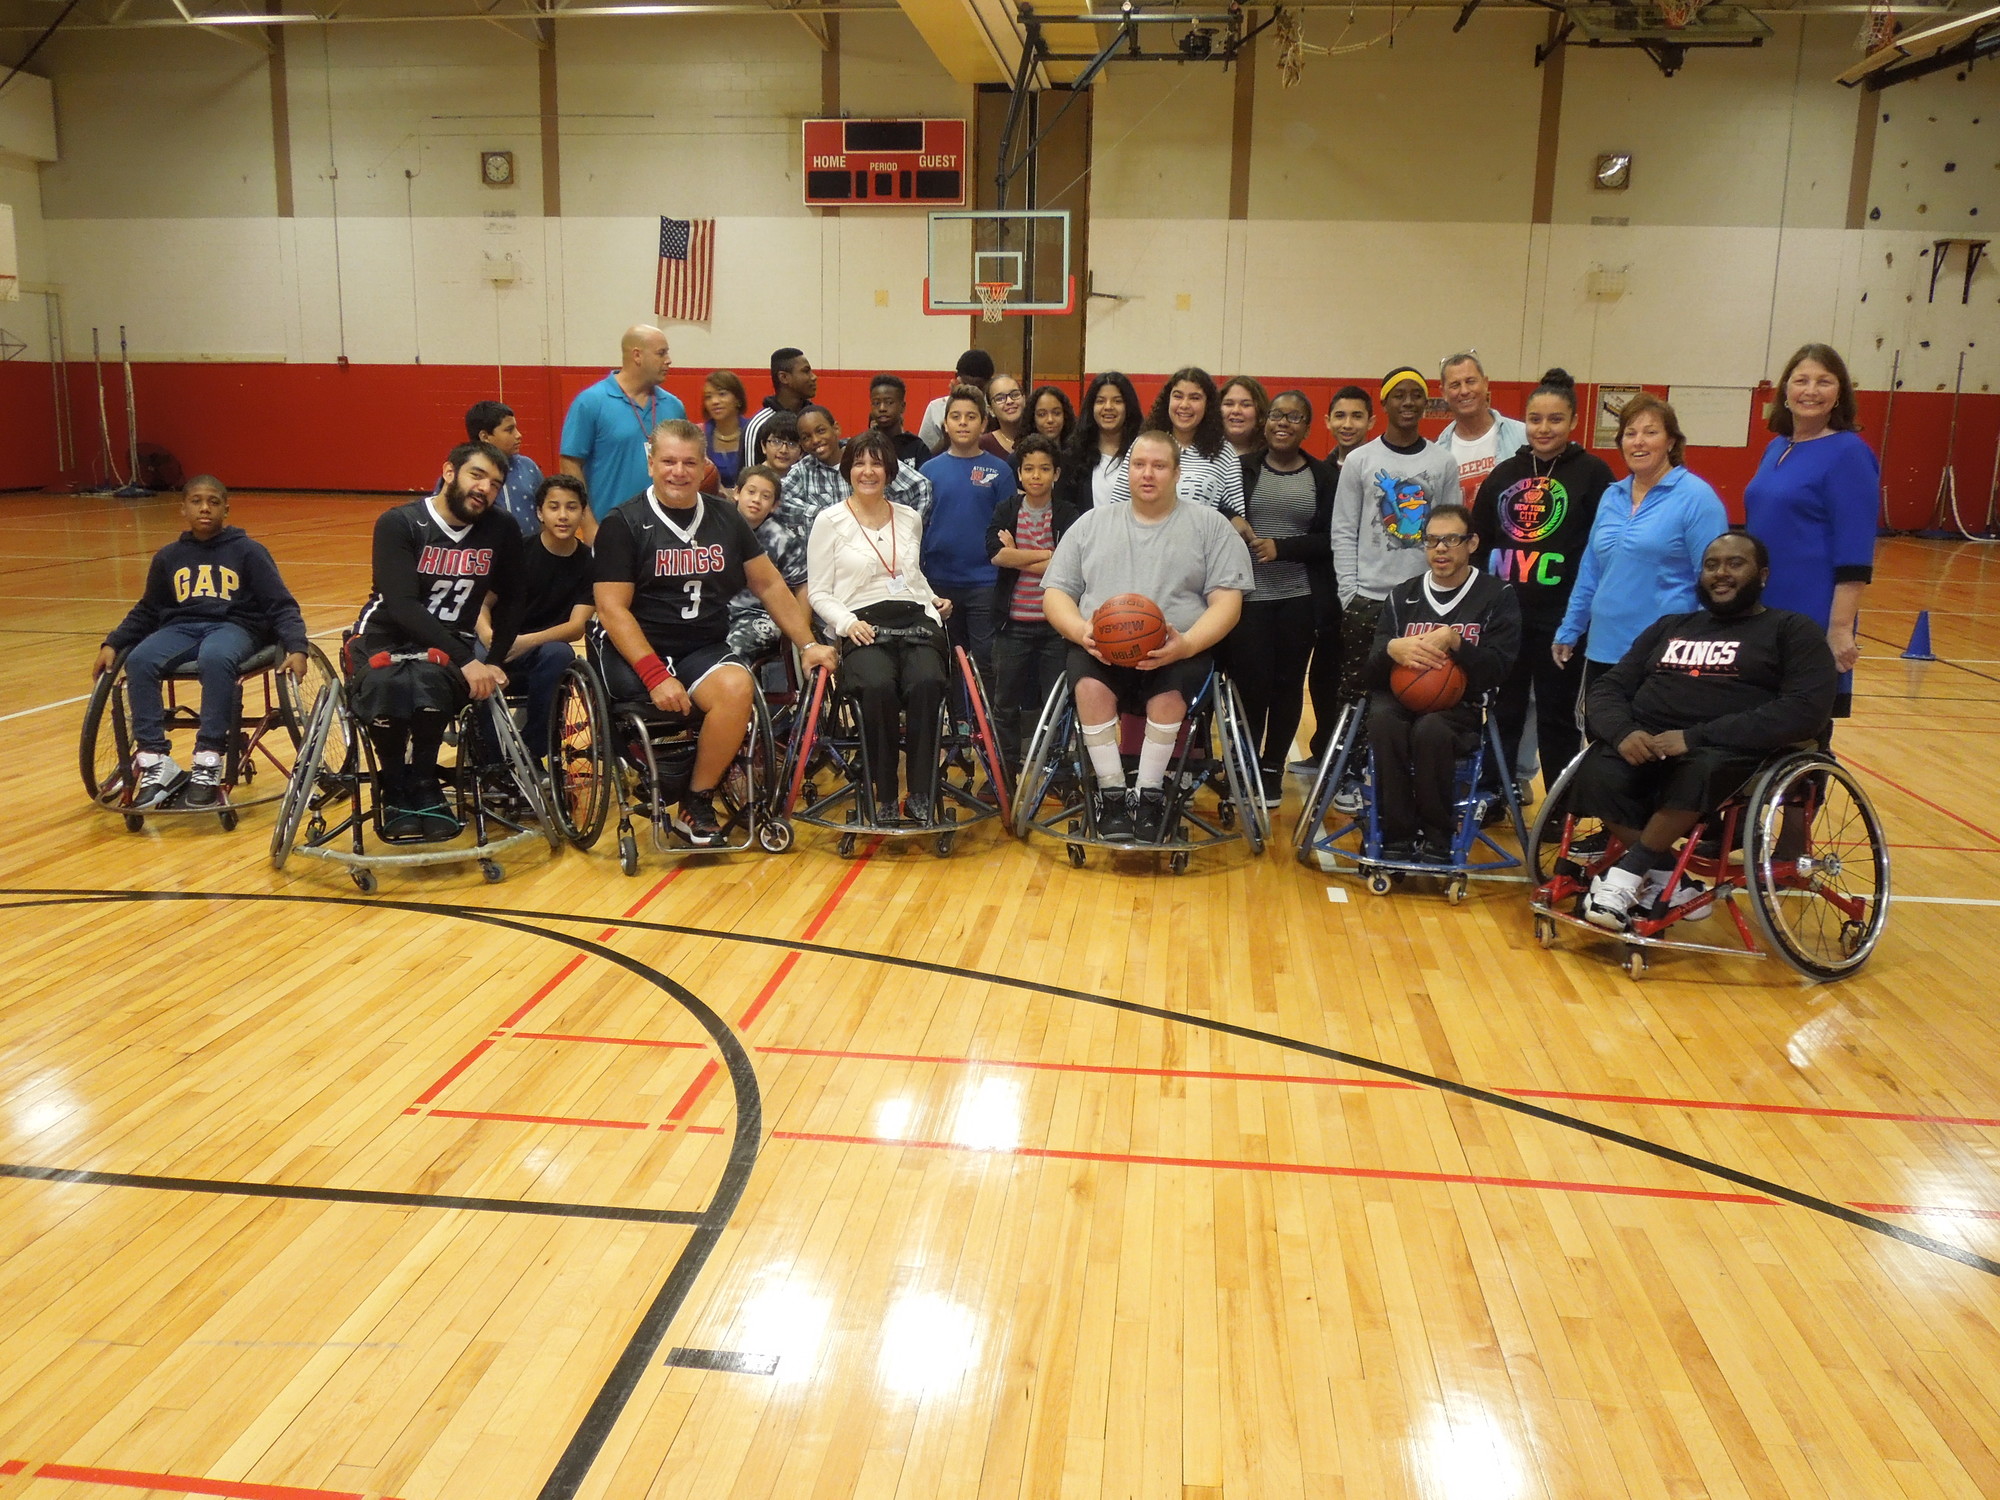 Members of the Kings Wheelchair Basektball team pose with Dodd students and administrators